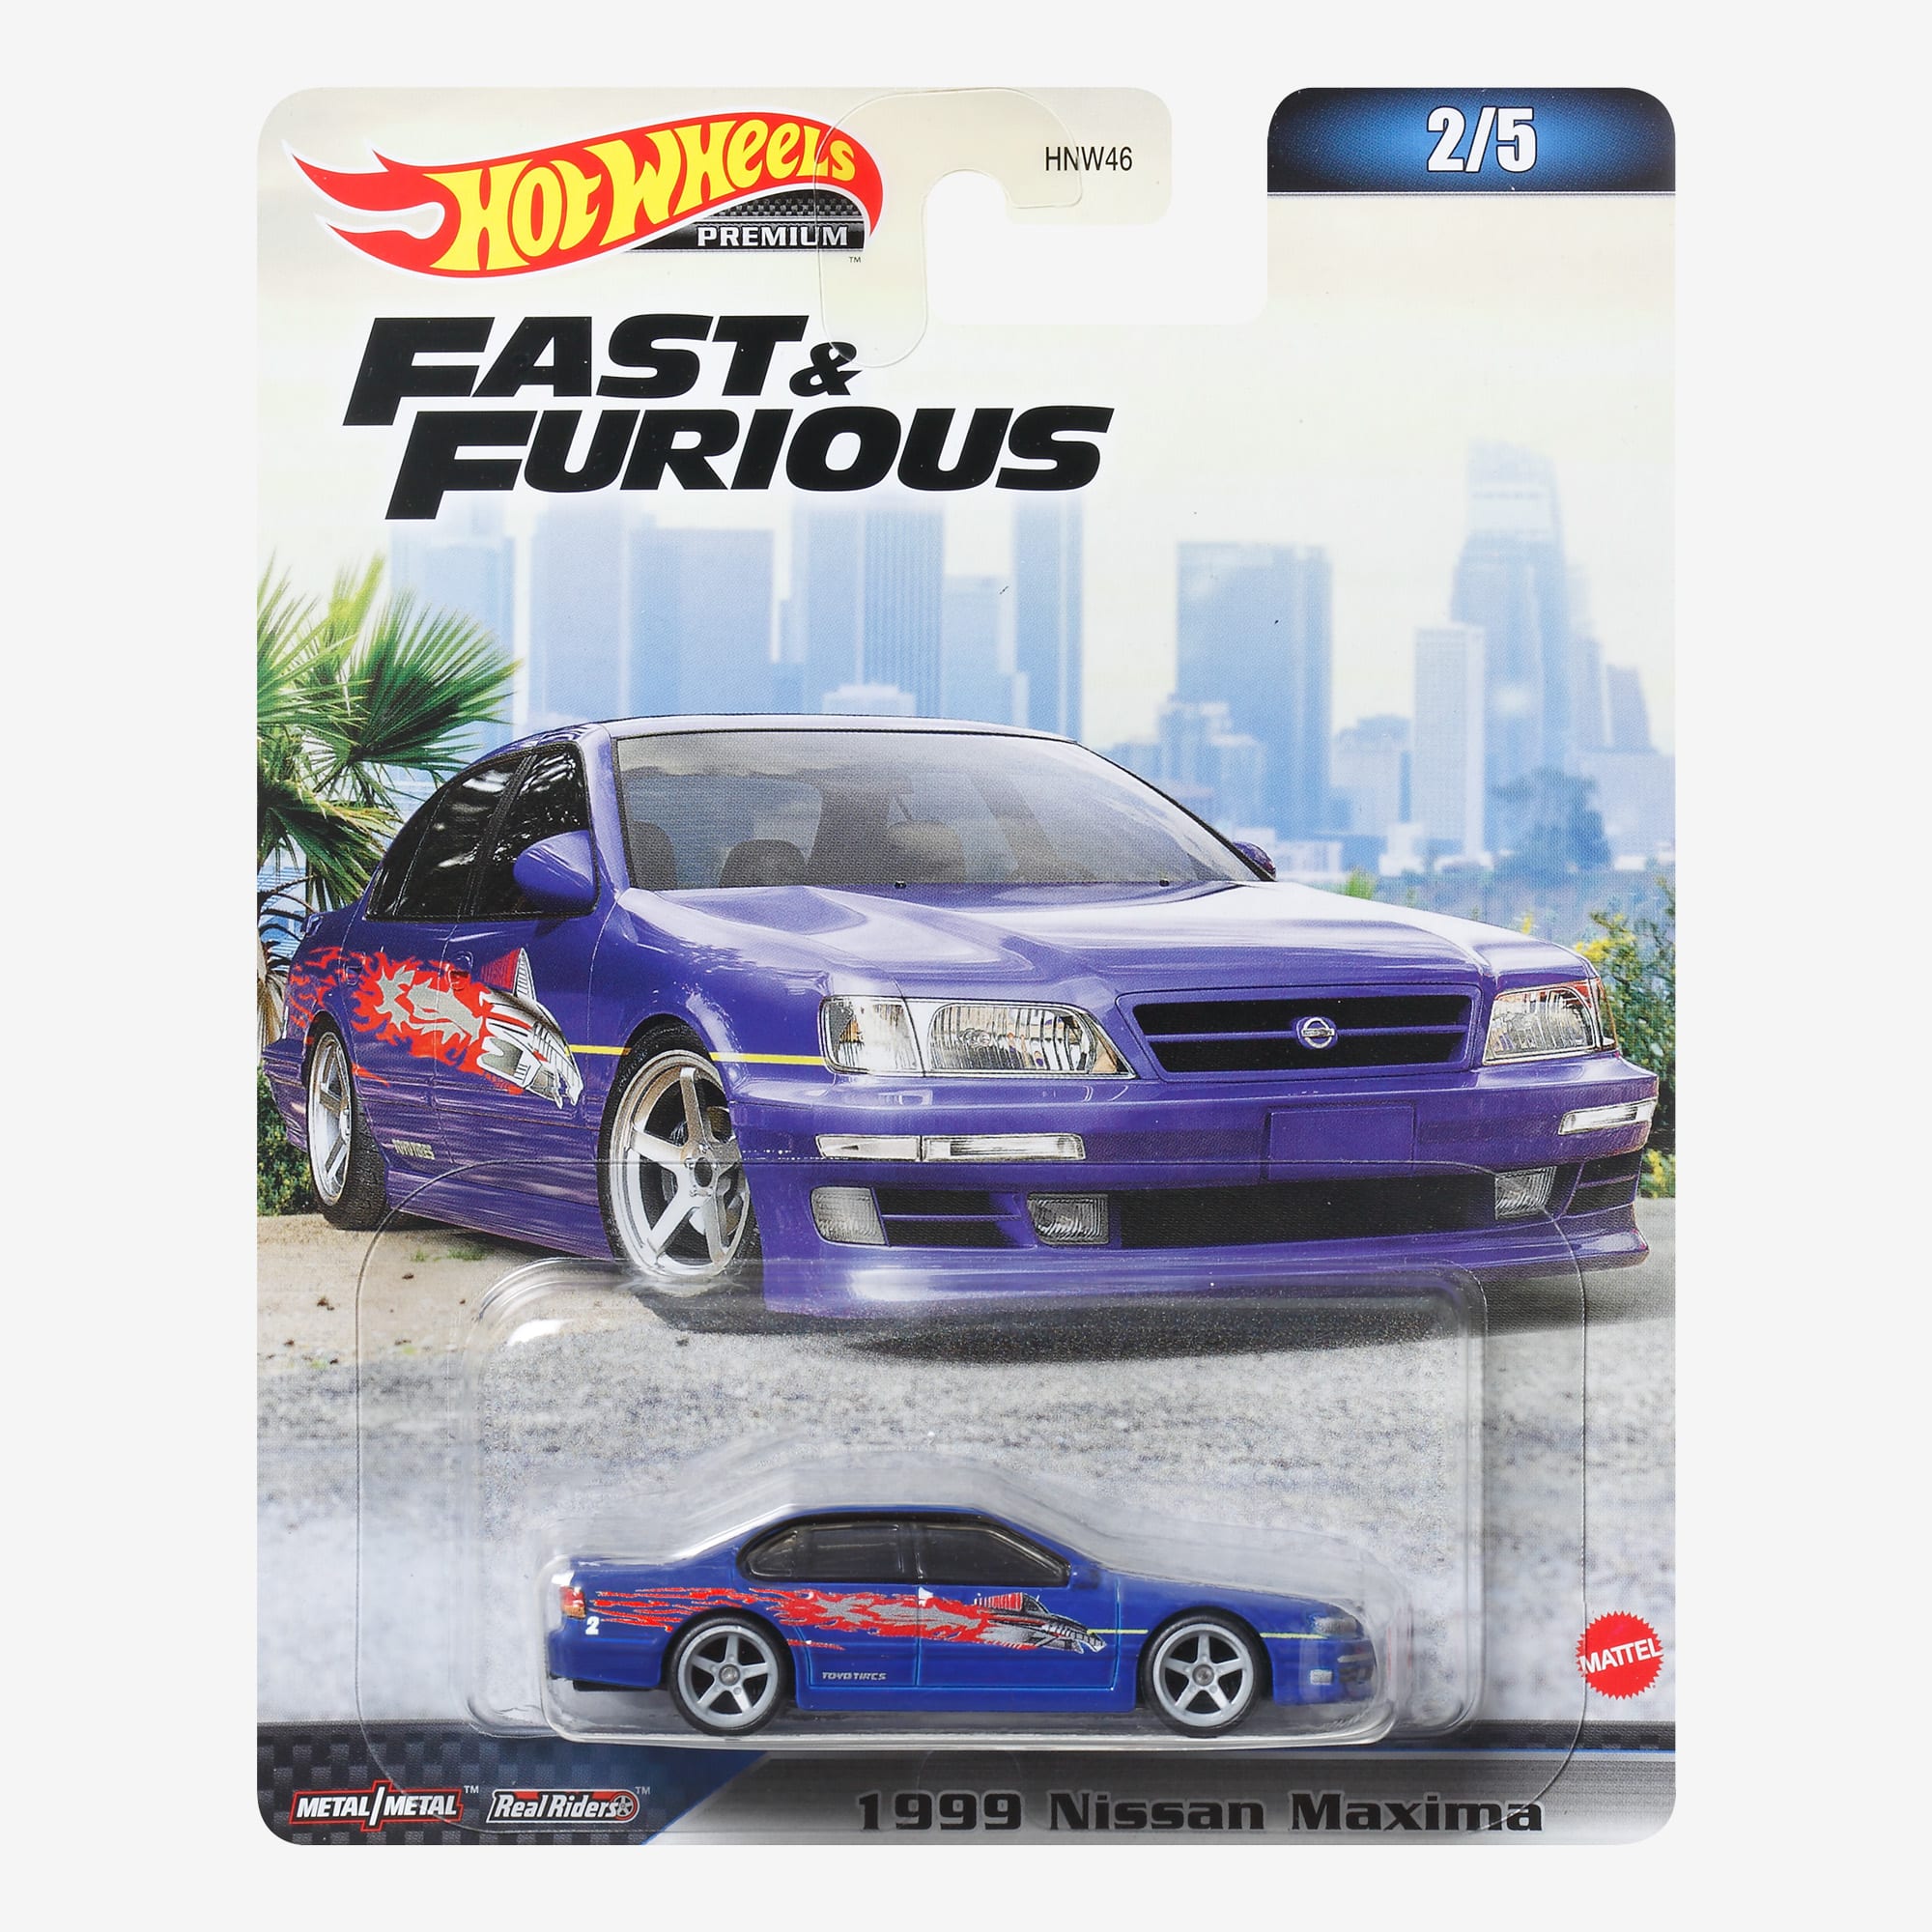 Hot Wheels Fast & Furious Collector Cars, 1999 Nissan Maxima